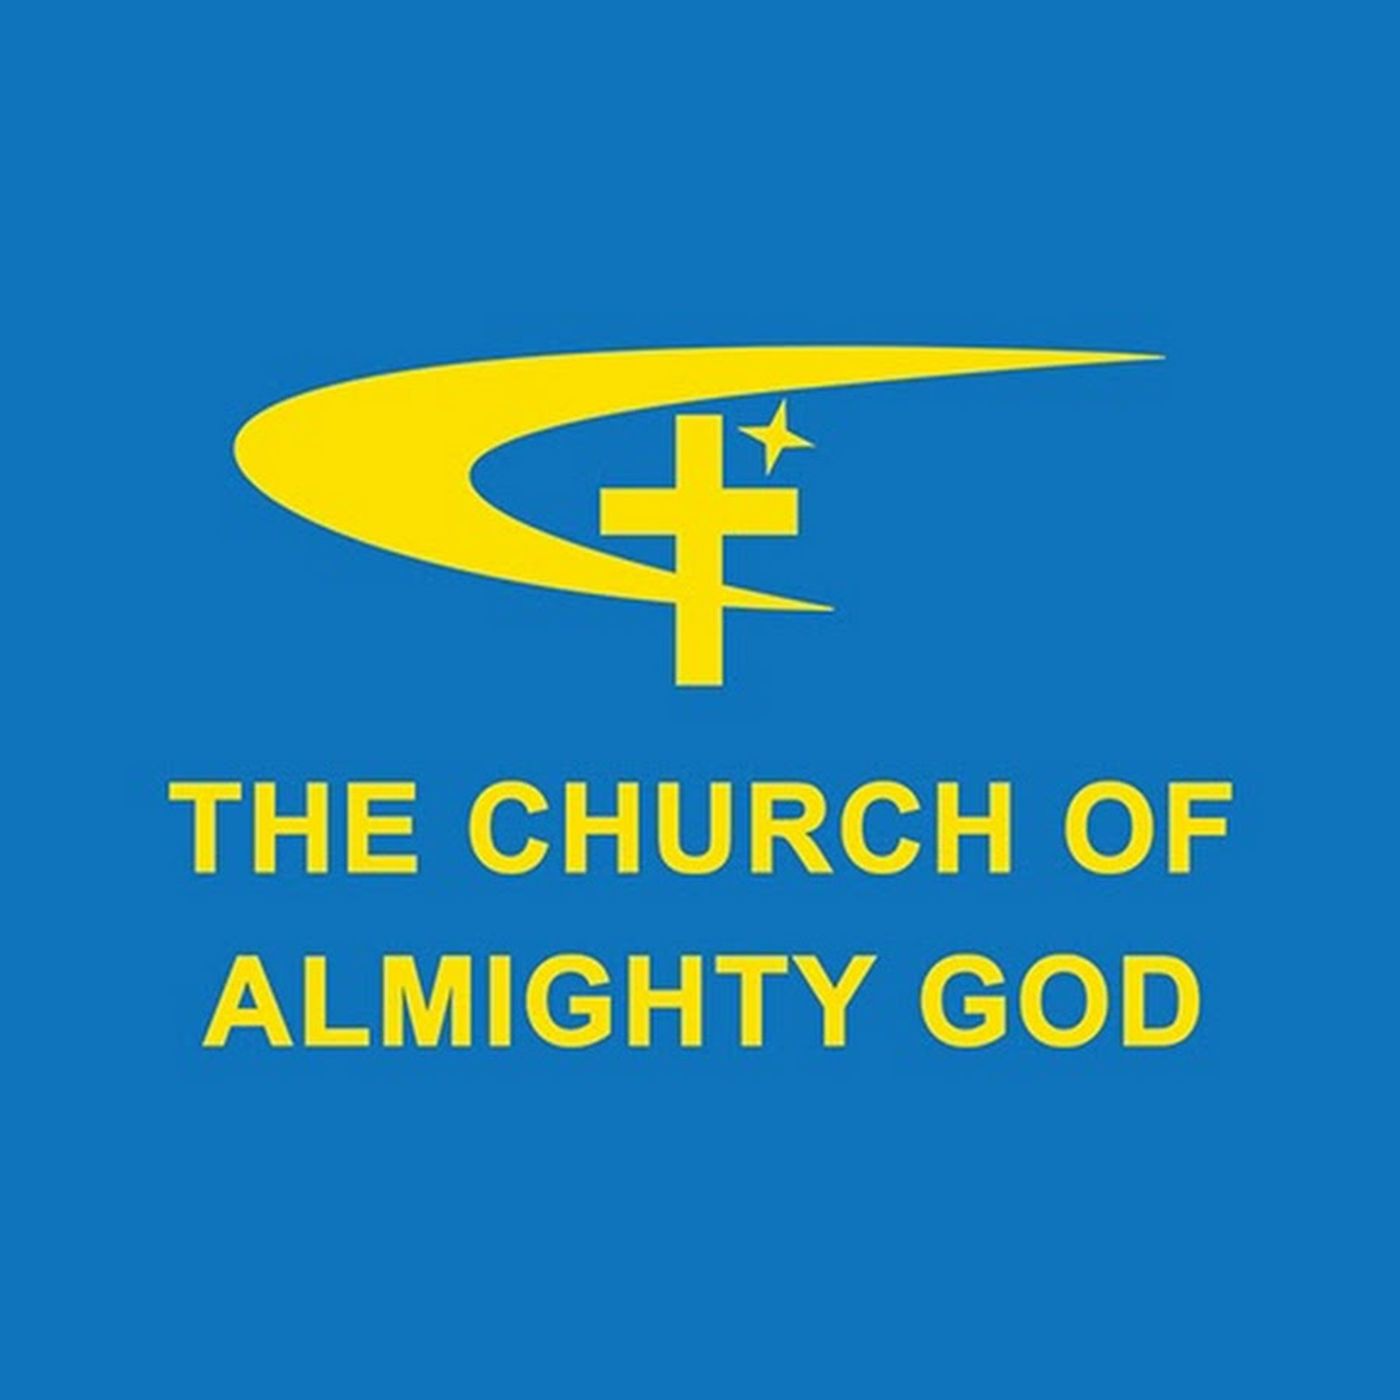 What is the Church of Almighty God?